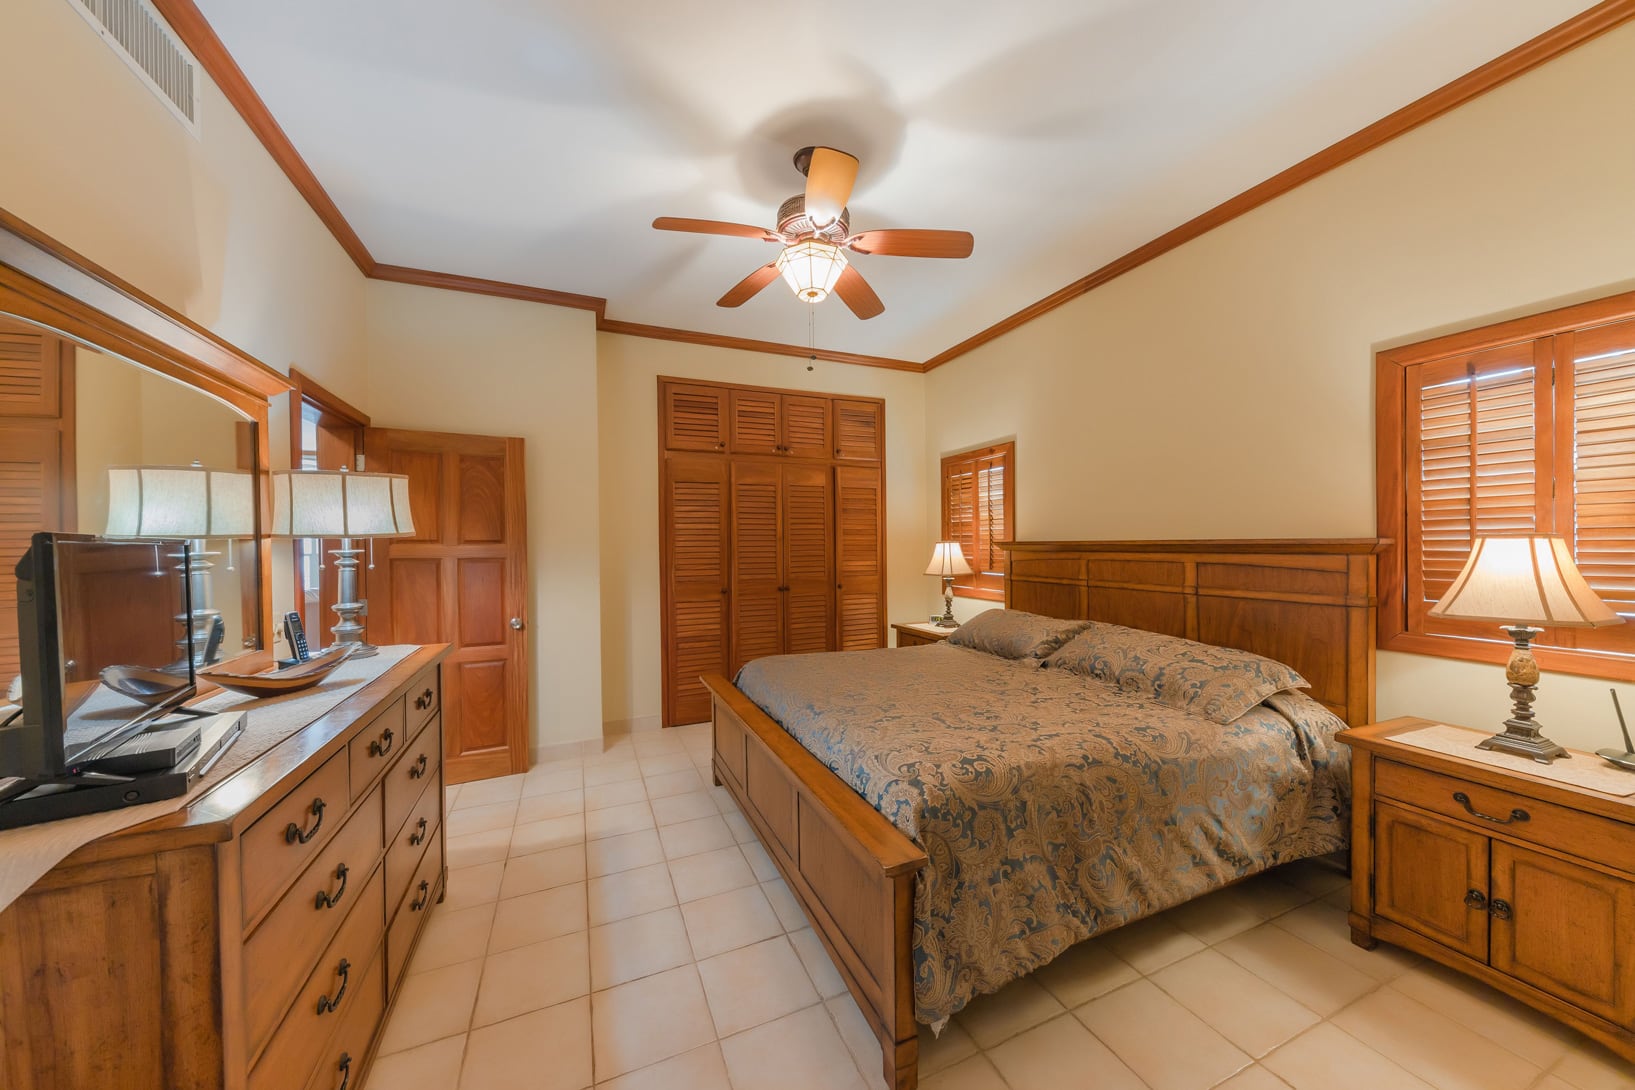 Warm and inviting master bedroom with a comfortable king-size bed, tropical accents, and a cozy atmosphere